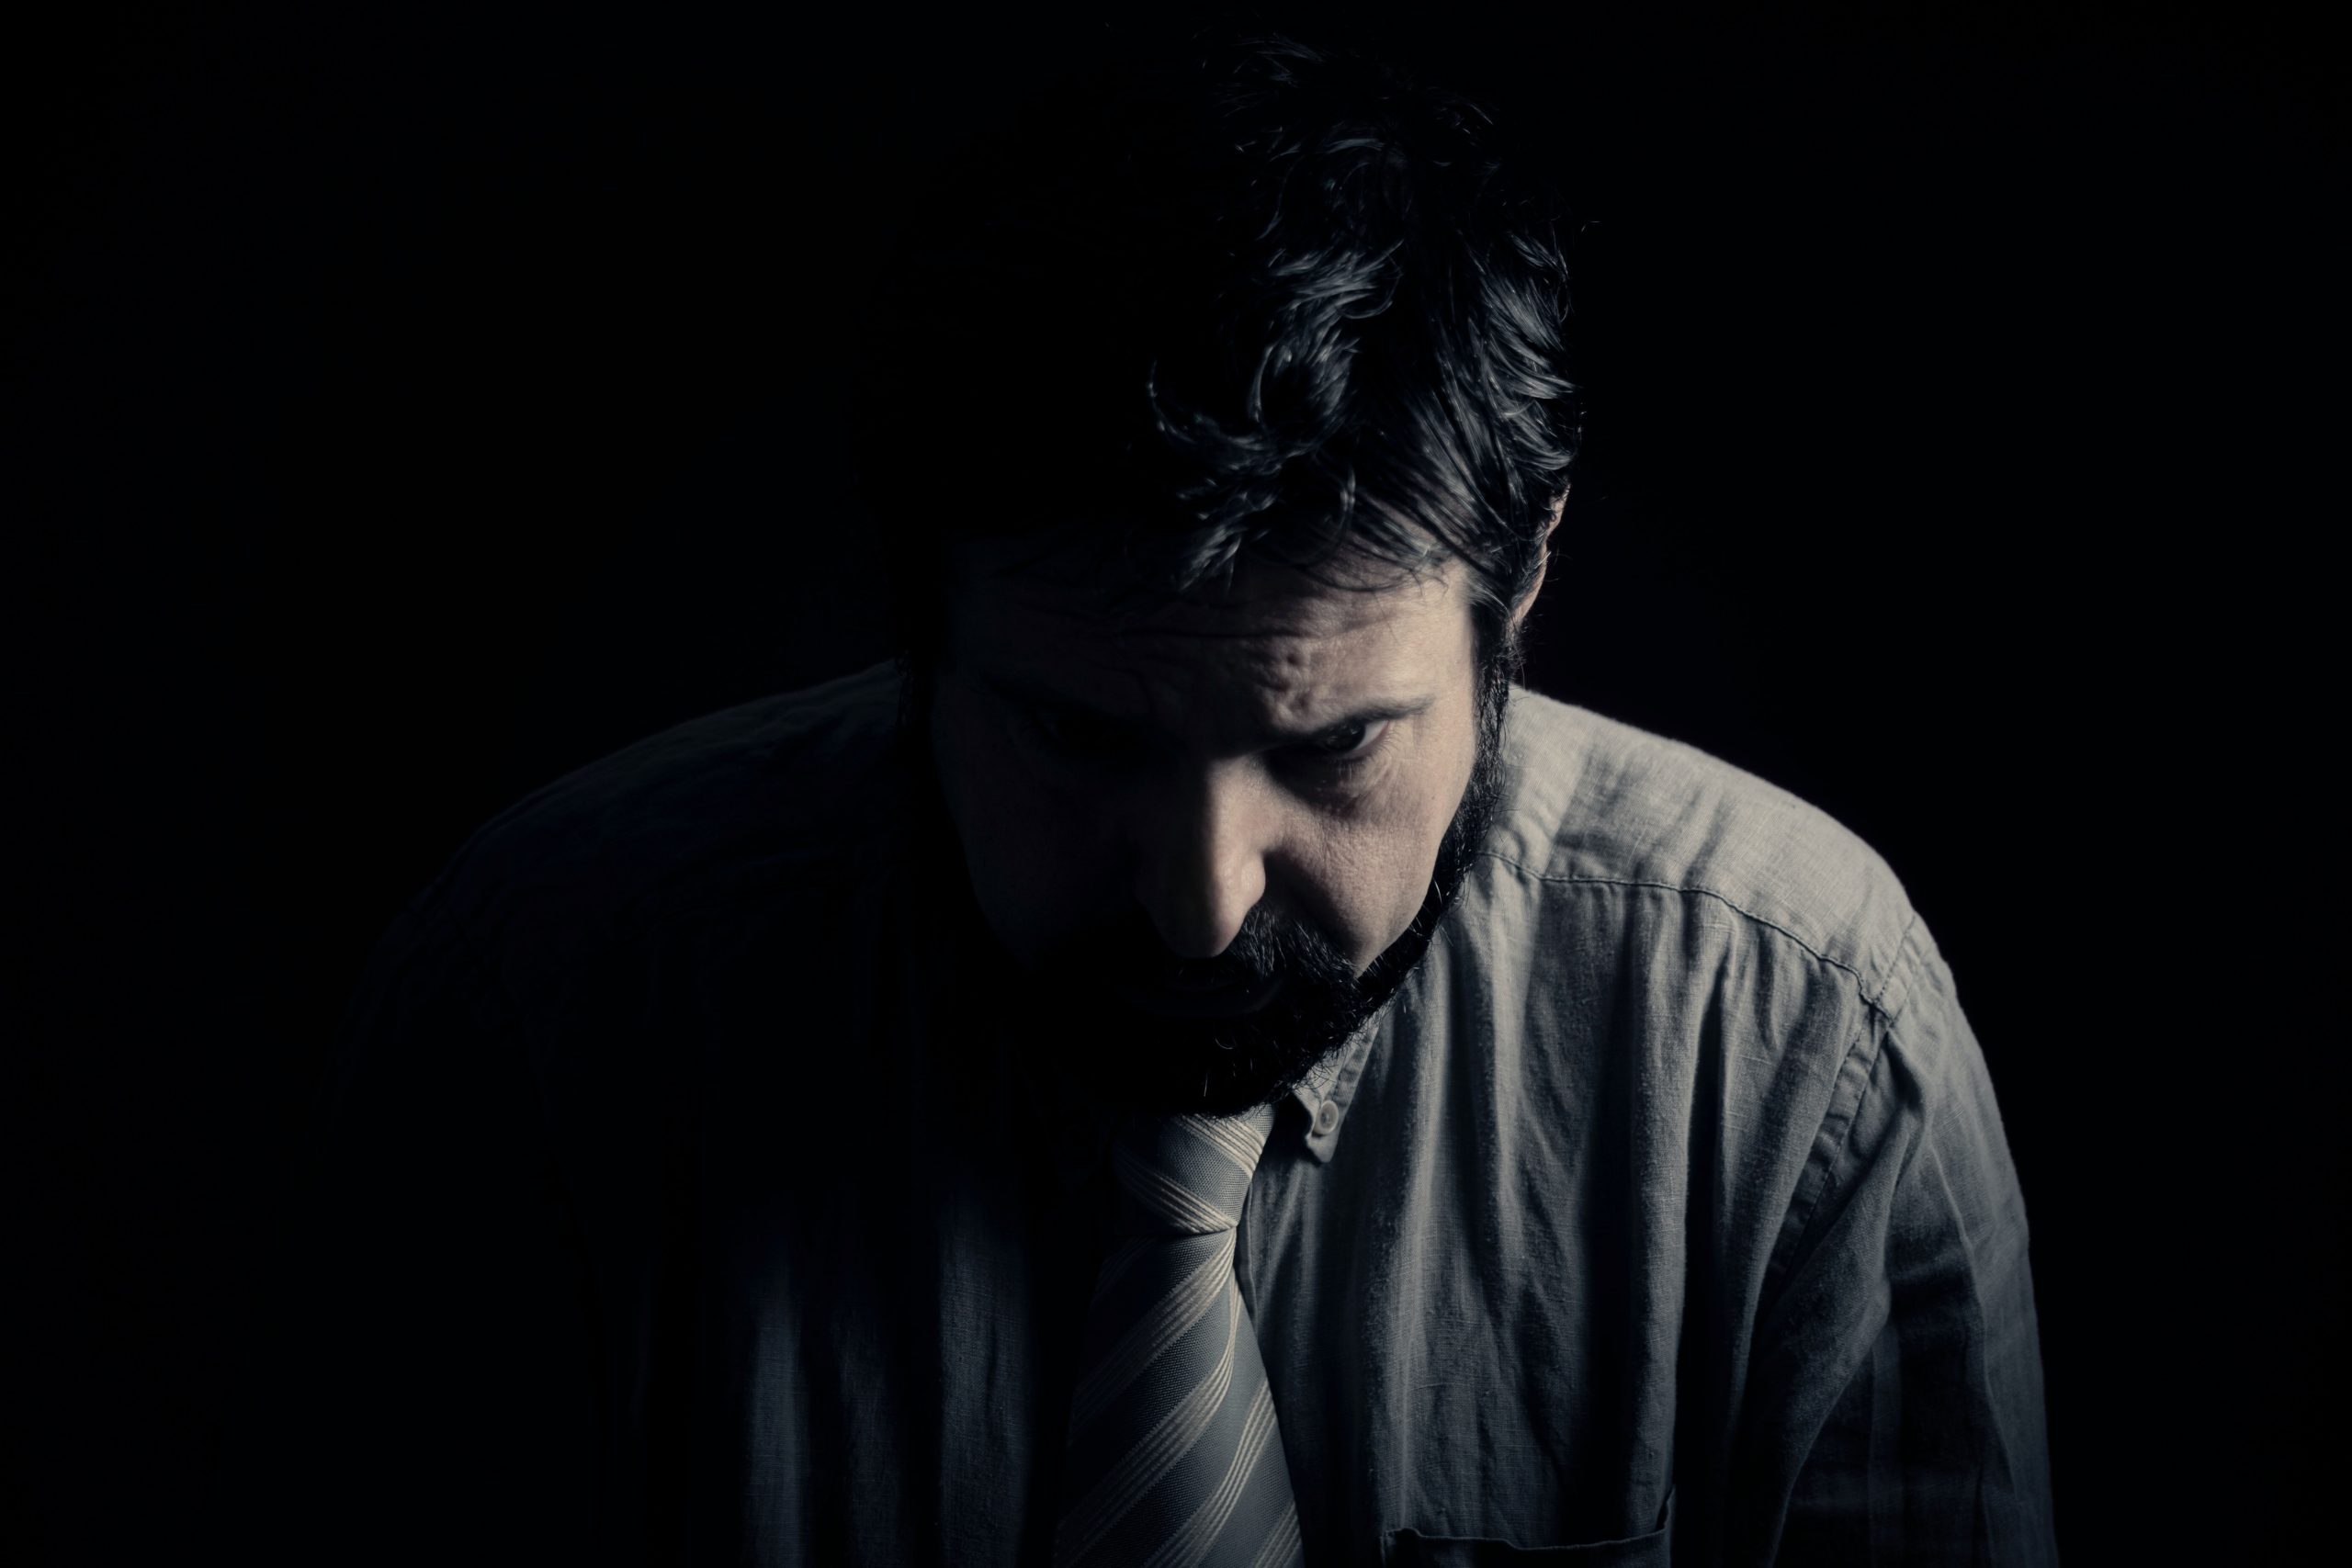 A man in gray looks down in a darkened room.